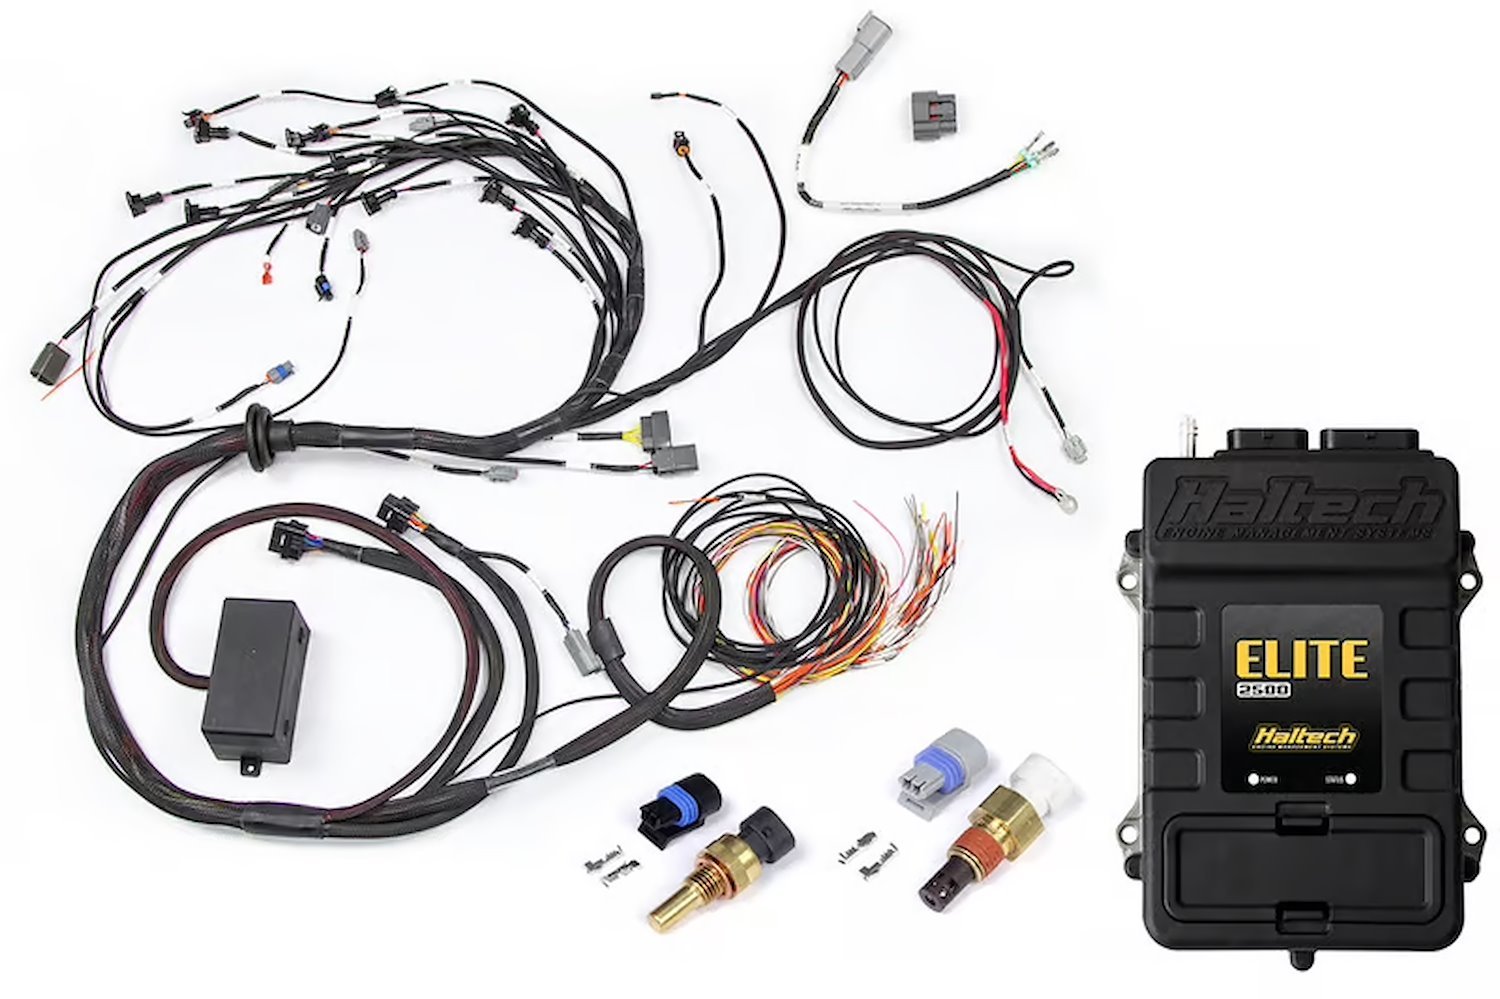 HT-151306 Elite 2500 + Terminated Harness Kit, Nissan RB Engines (no ignition sub-harness, no CAS sub-harness)